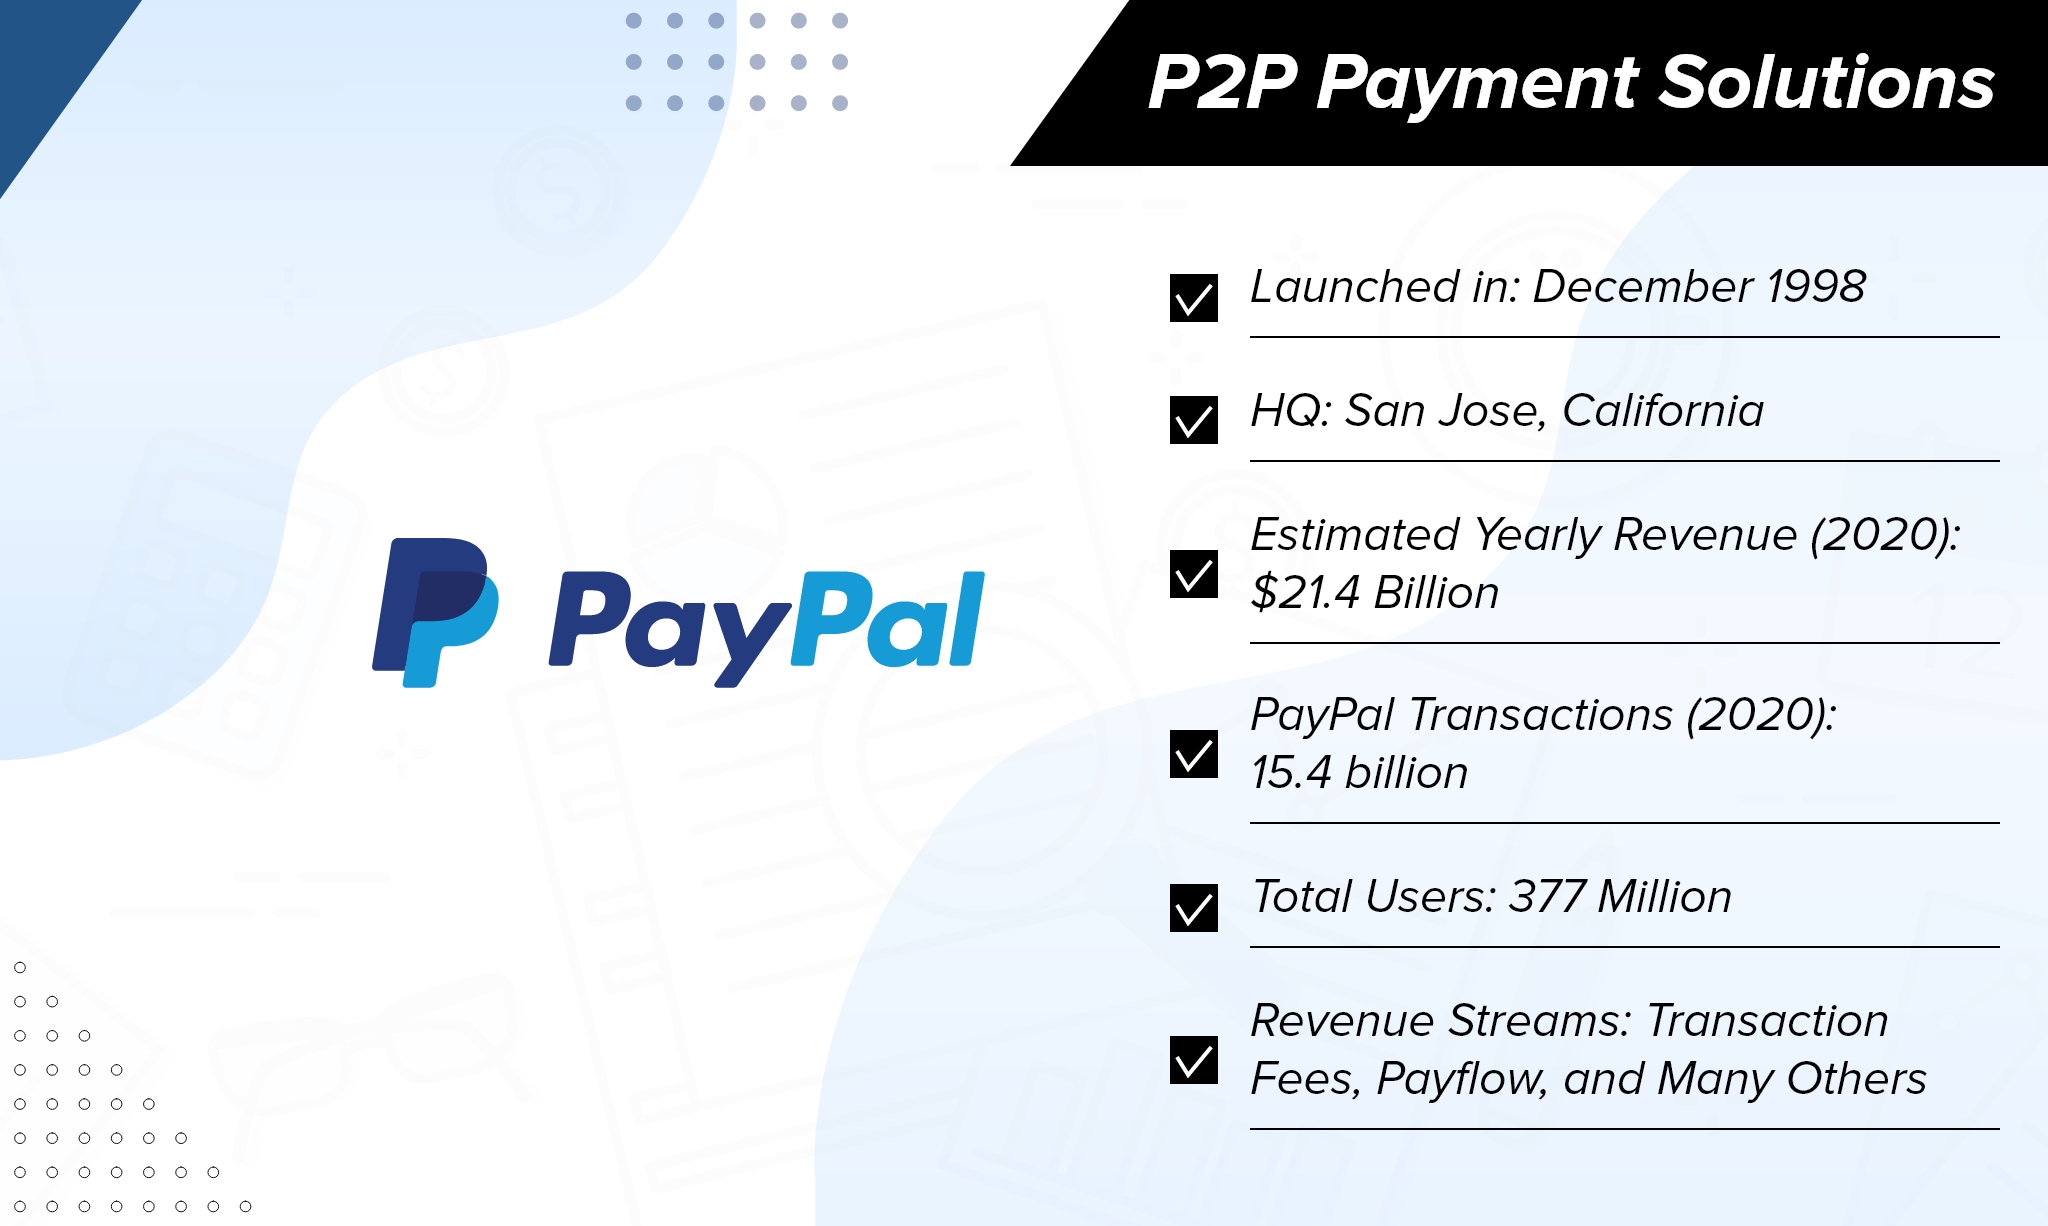 P2P Payment Solutions